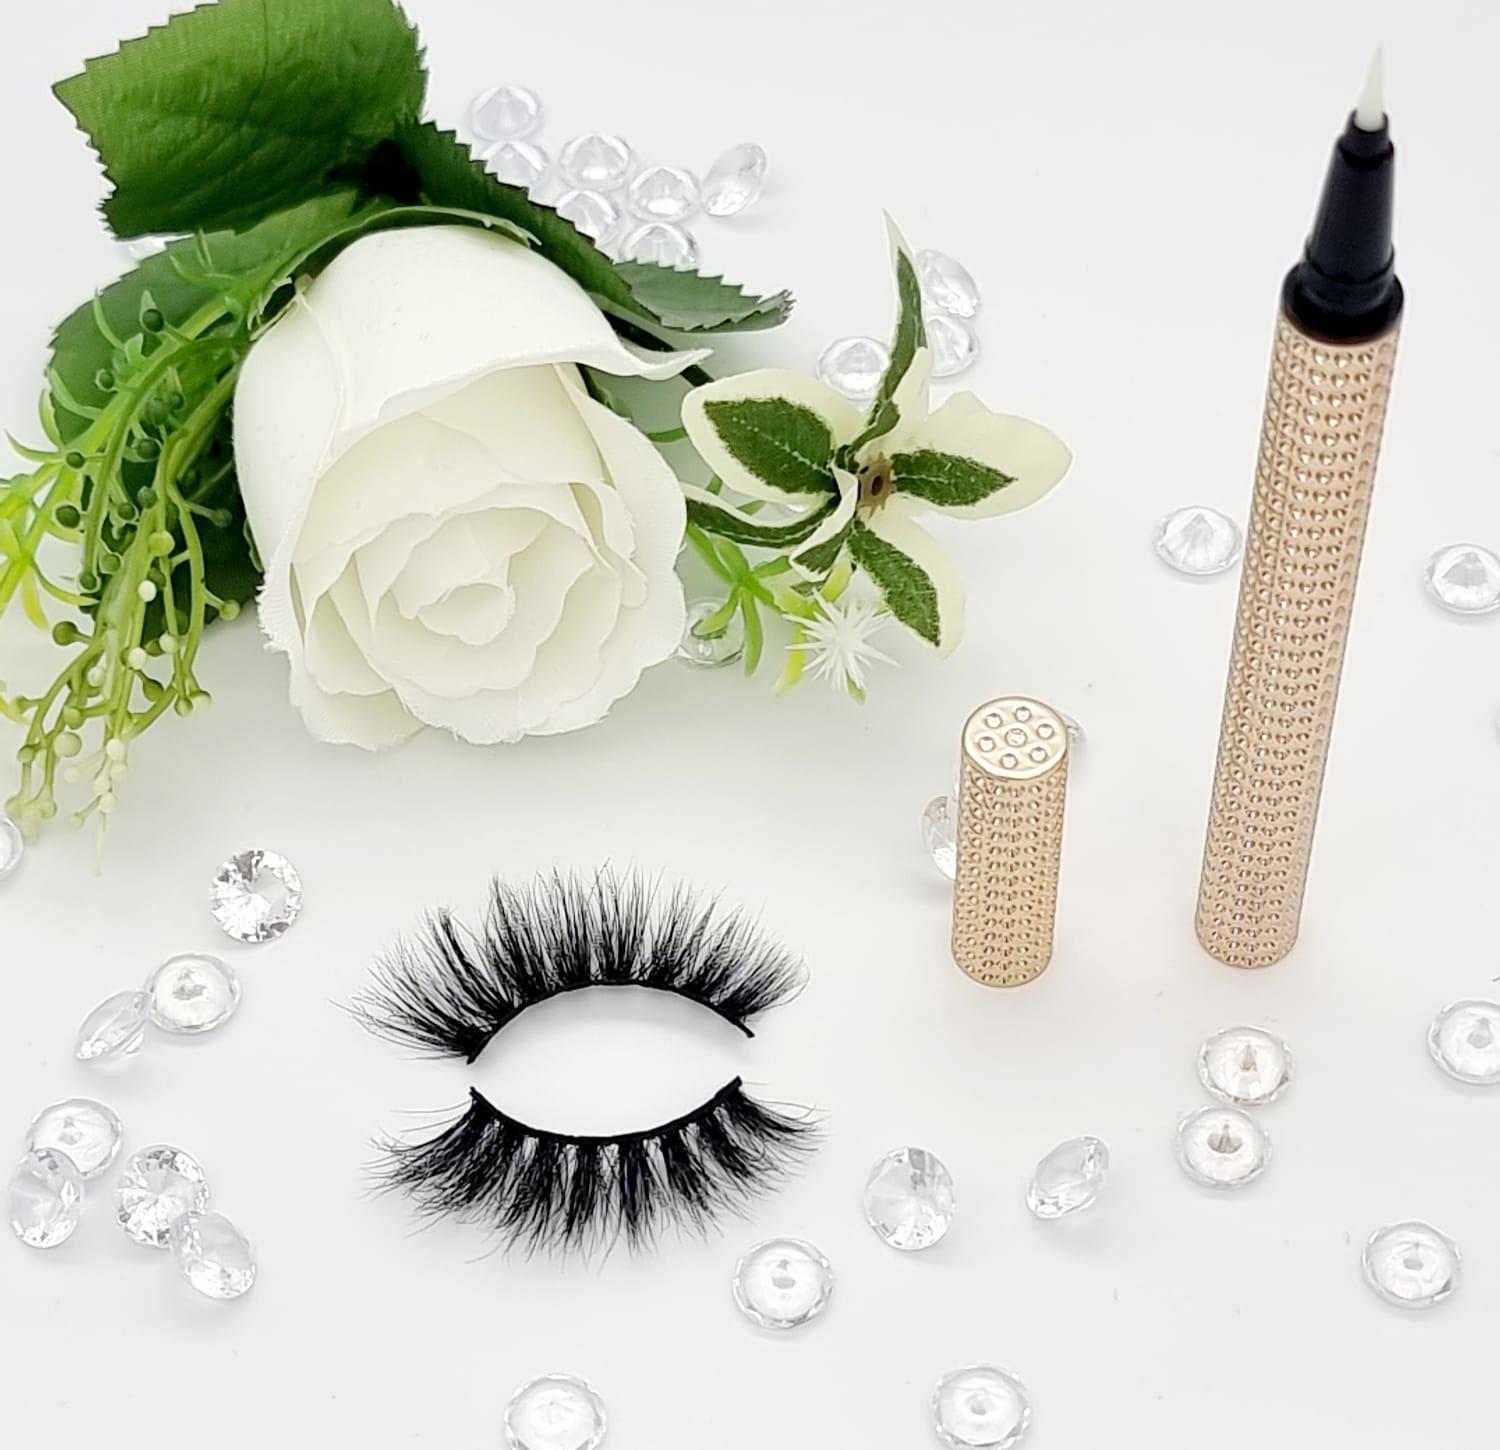 Tashie - one of our most dramatic lashes, this choice of lash of is for that glamour look who wants to be noticed on a night out taking lashes to that next level. A flare-eye 3D Mink Lash designed with both dramatic length, volume & plumpness.